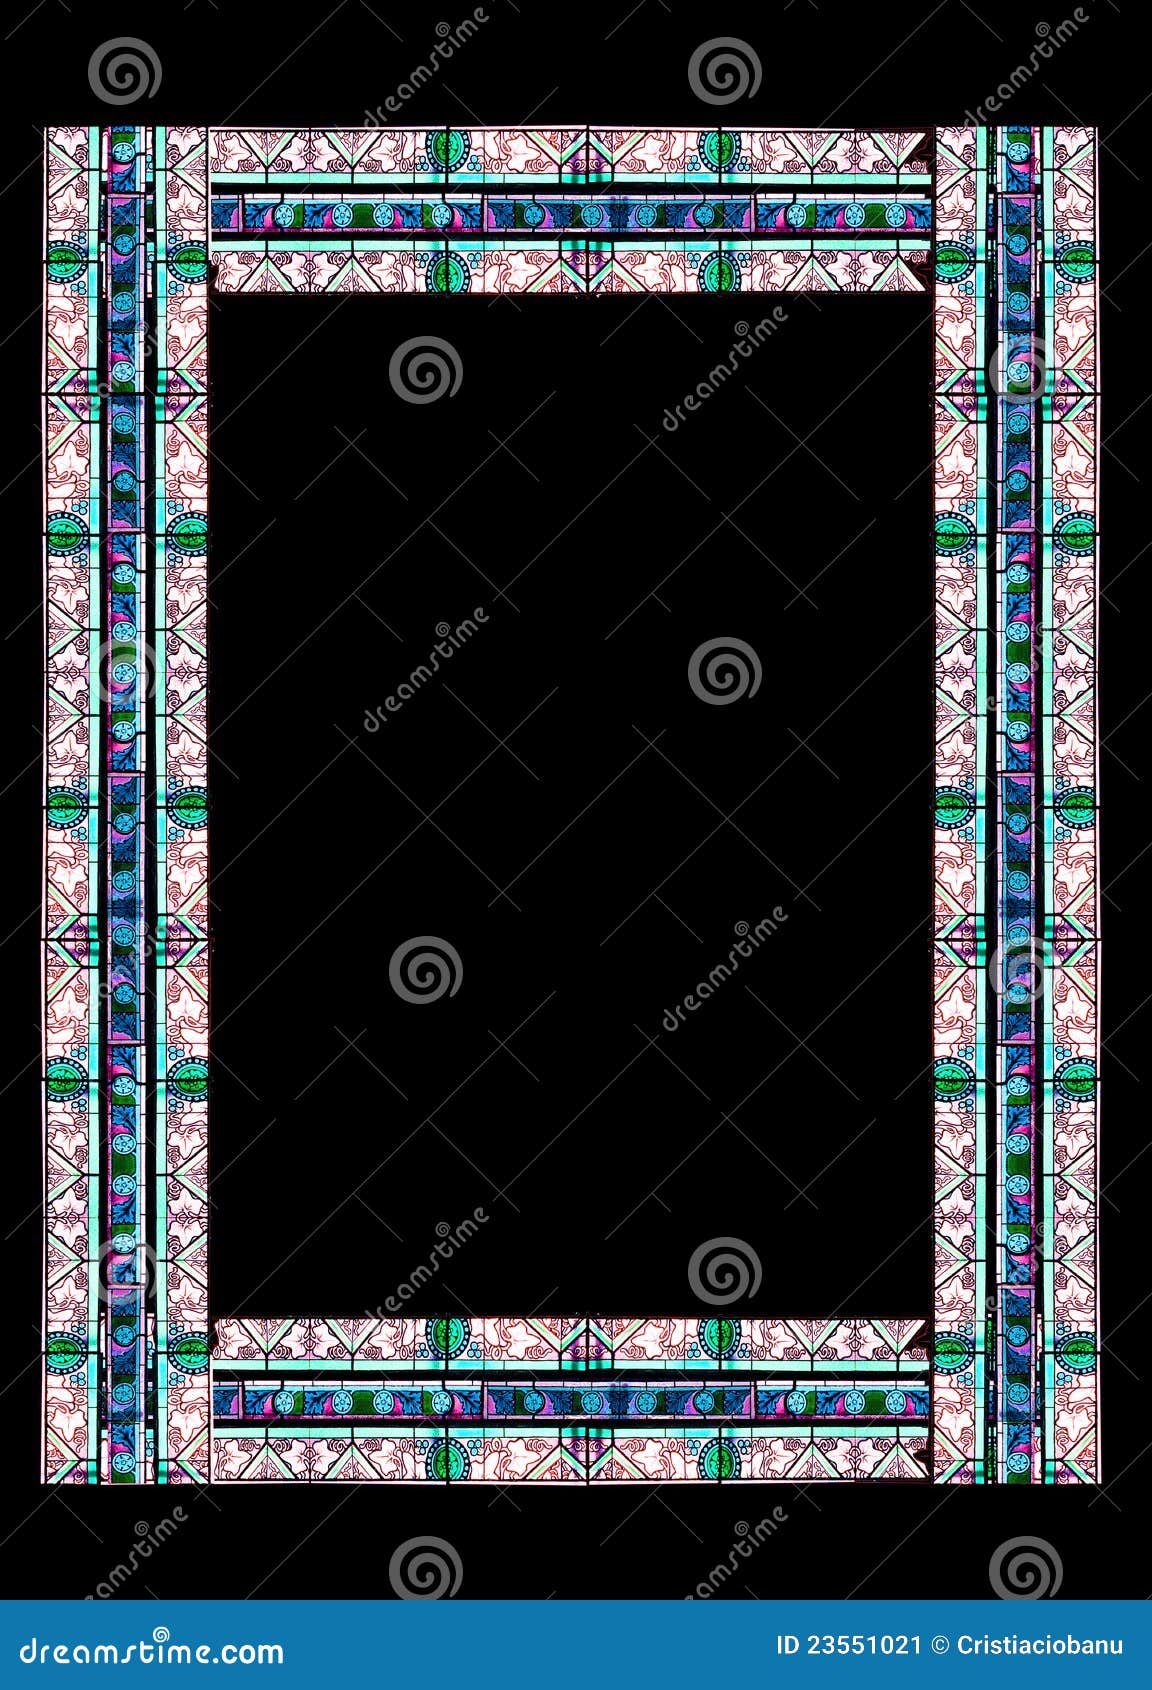 Border Made Of Stained Glass Stock Image - Image: 23551021